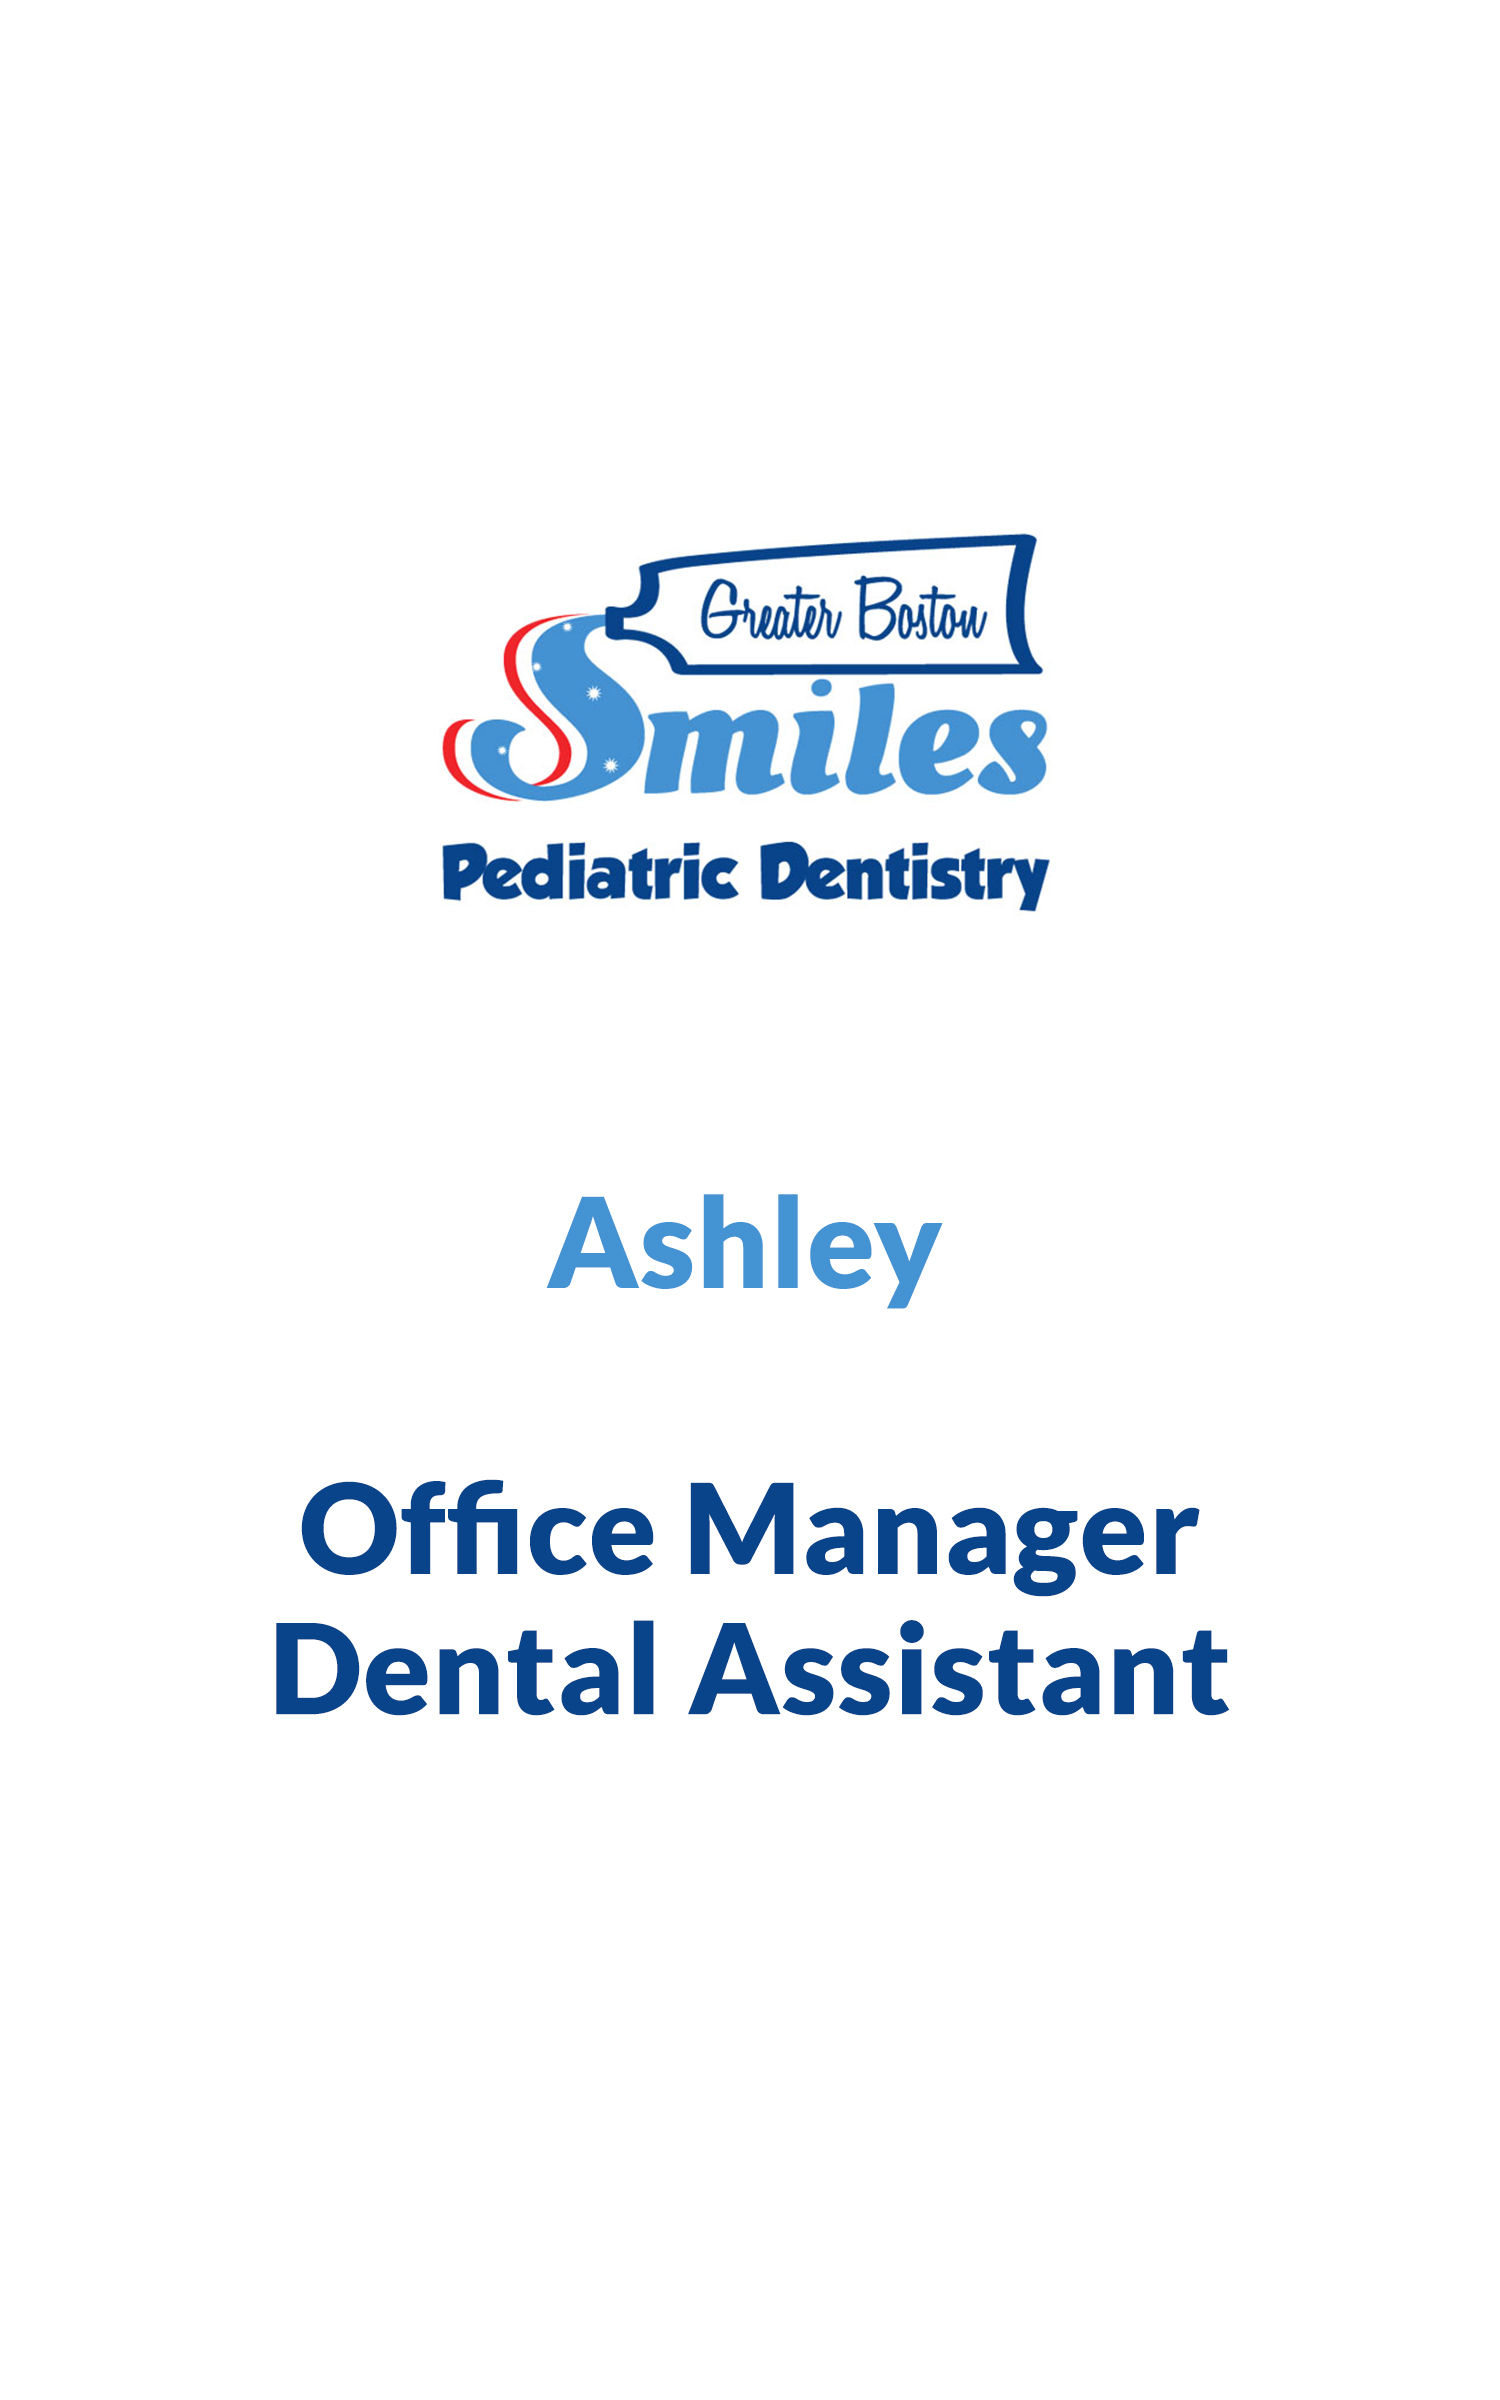 Ashley, Office Manager/Dental Assistant